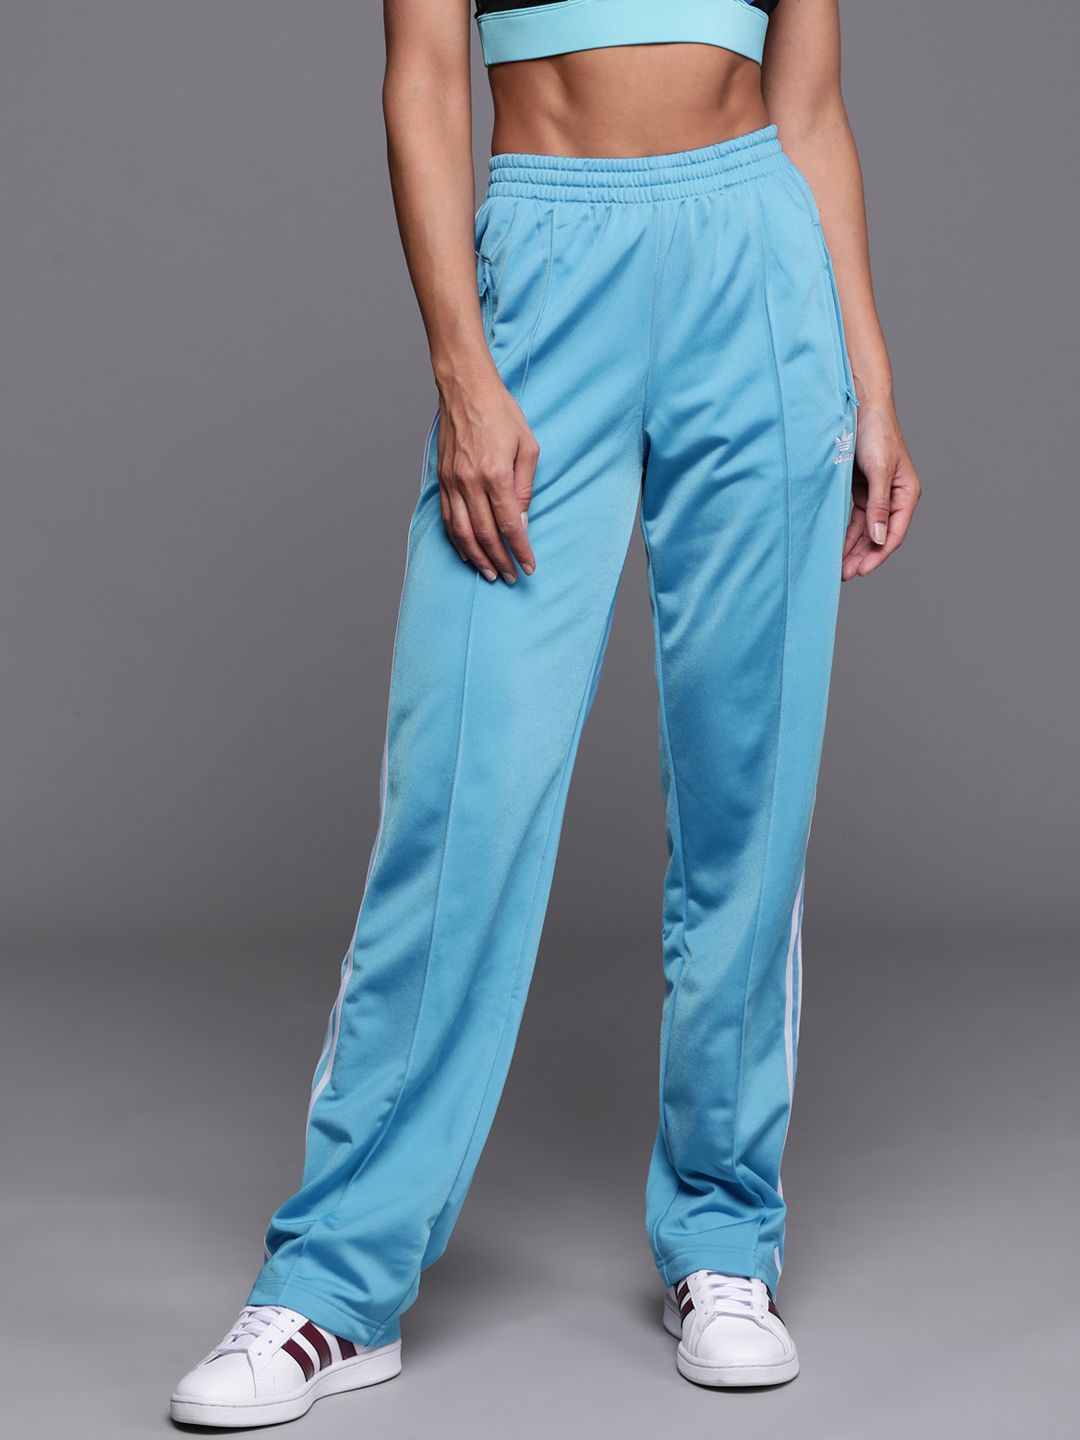 ADIDAS Originals Women Blue Firebird Solid Sustainable Track Pants Price in India